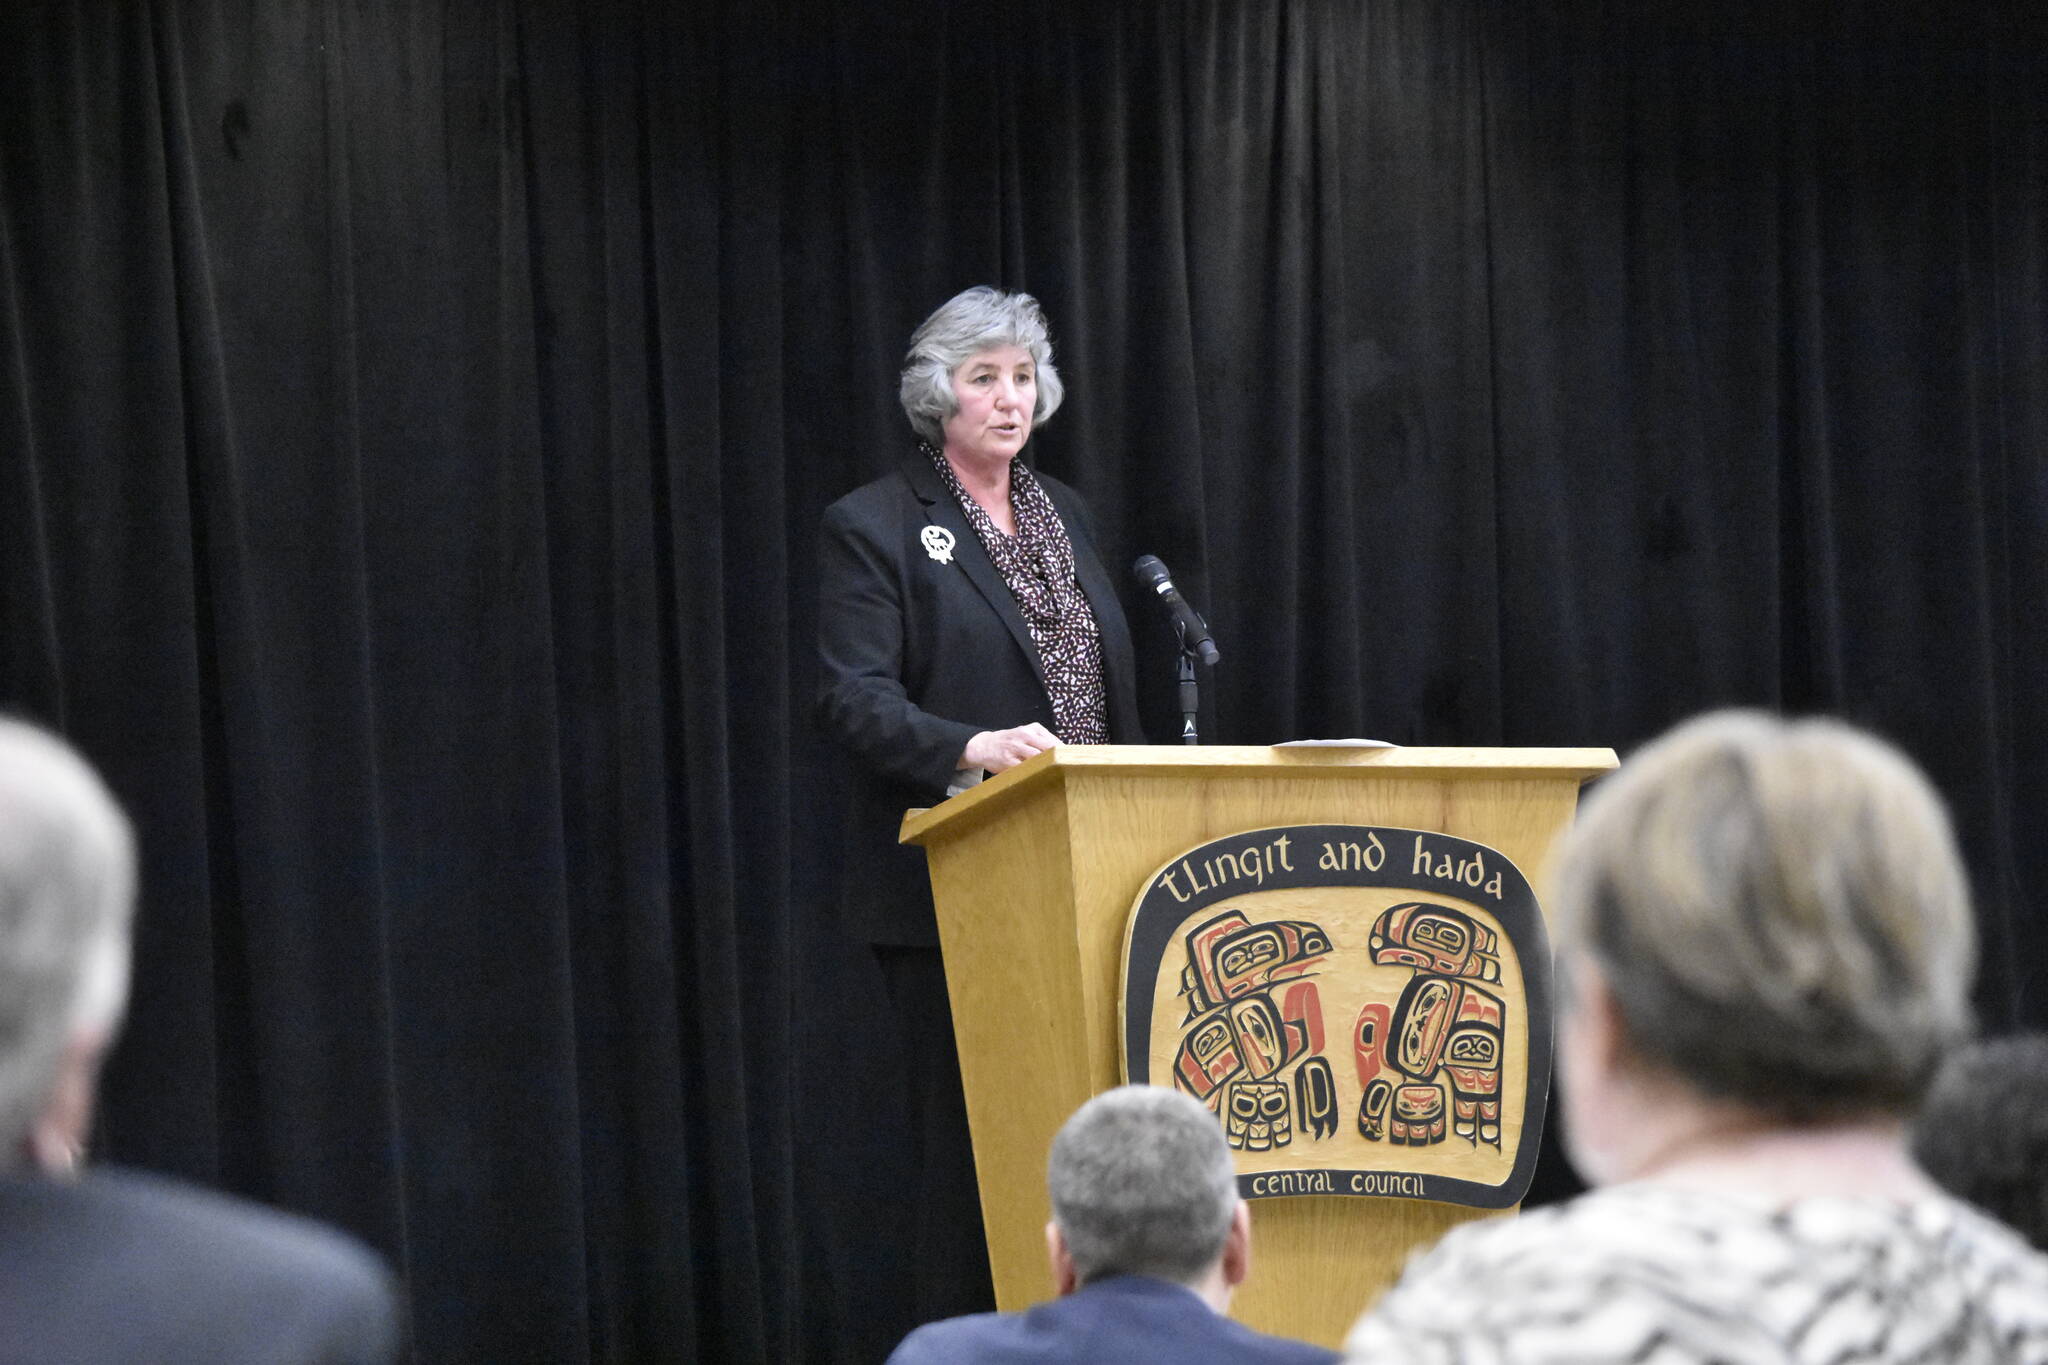 University of Alaska President Pat Pitney spoke to the Juneau Chamber of Commerce Luncheon at Elizabeth Peratrovich Hall on Thursday, March 3, 2022, emphasizing the system's importance to the state's workforce. (Peter Segall / Juneau Empire)